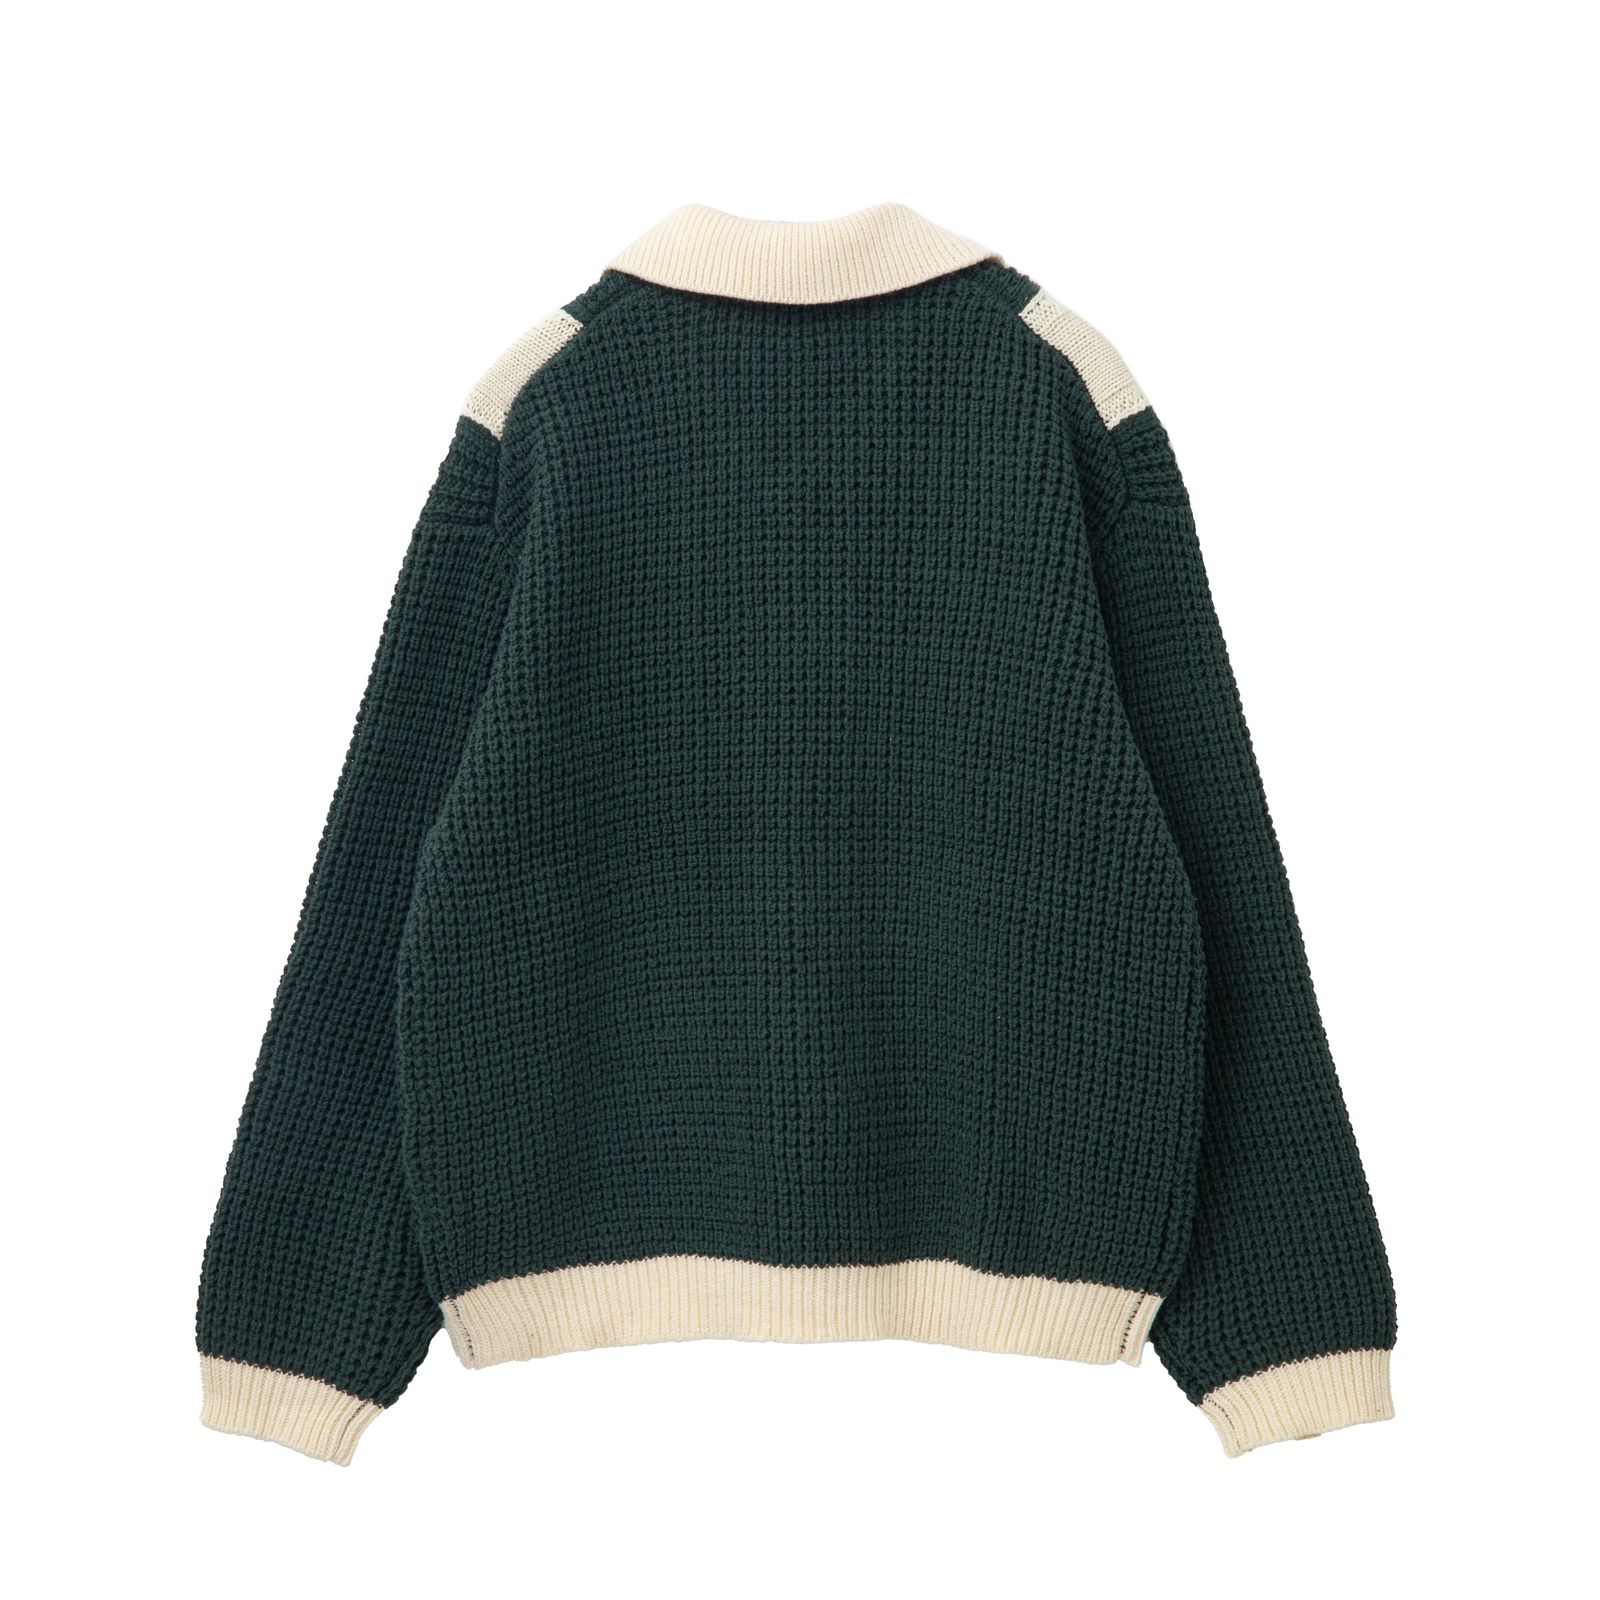 SPECIAL GUEST K.K - 【残りわずか】SG Cable Collar Cardigan 